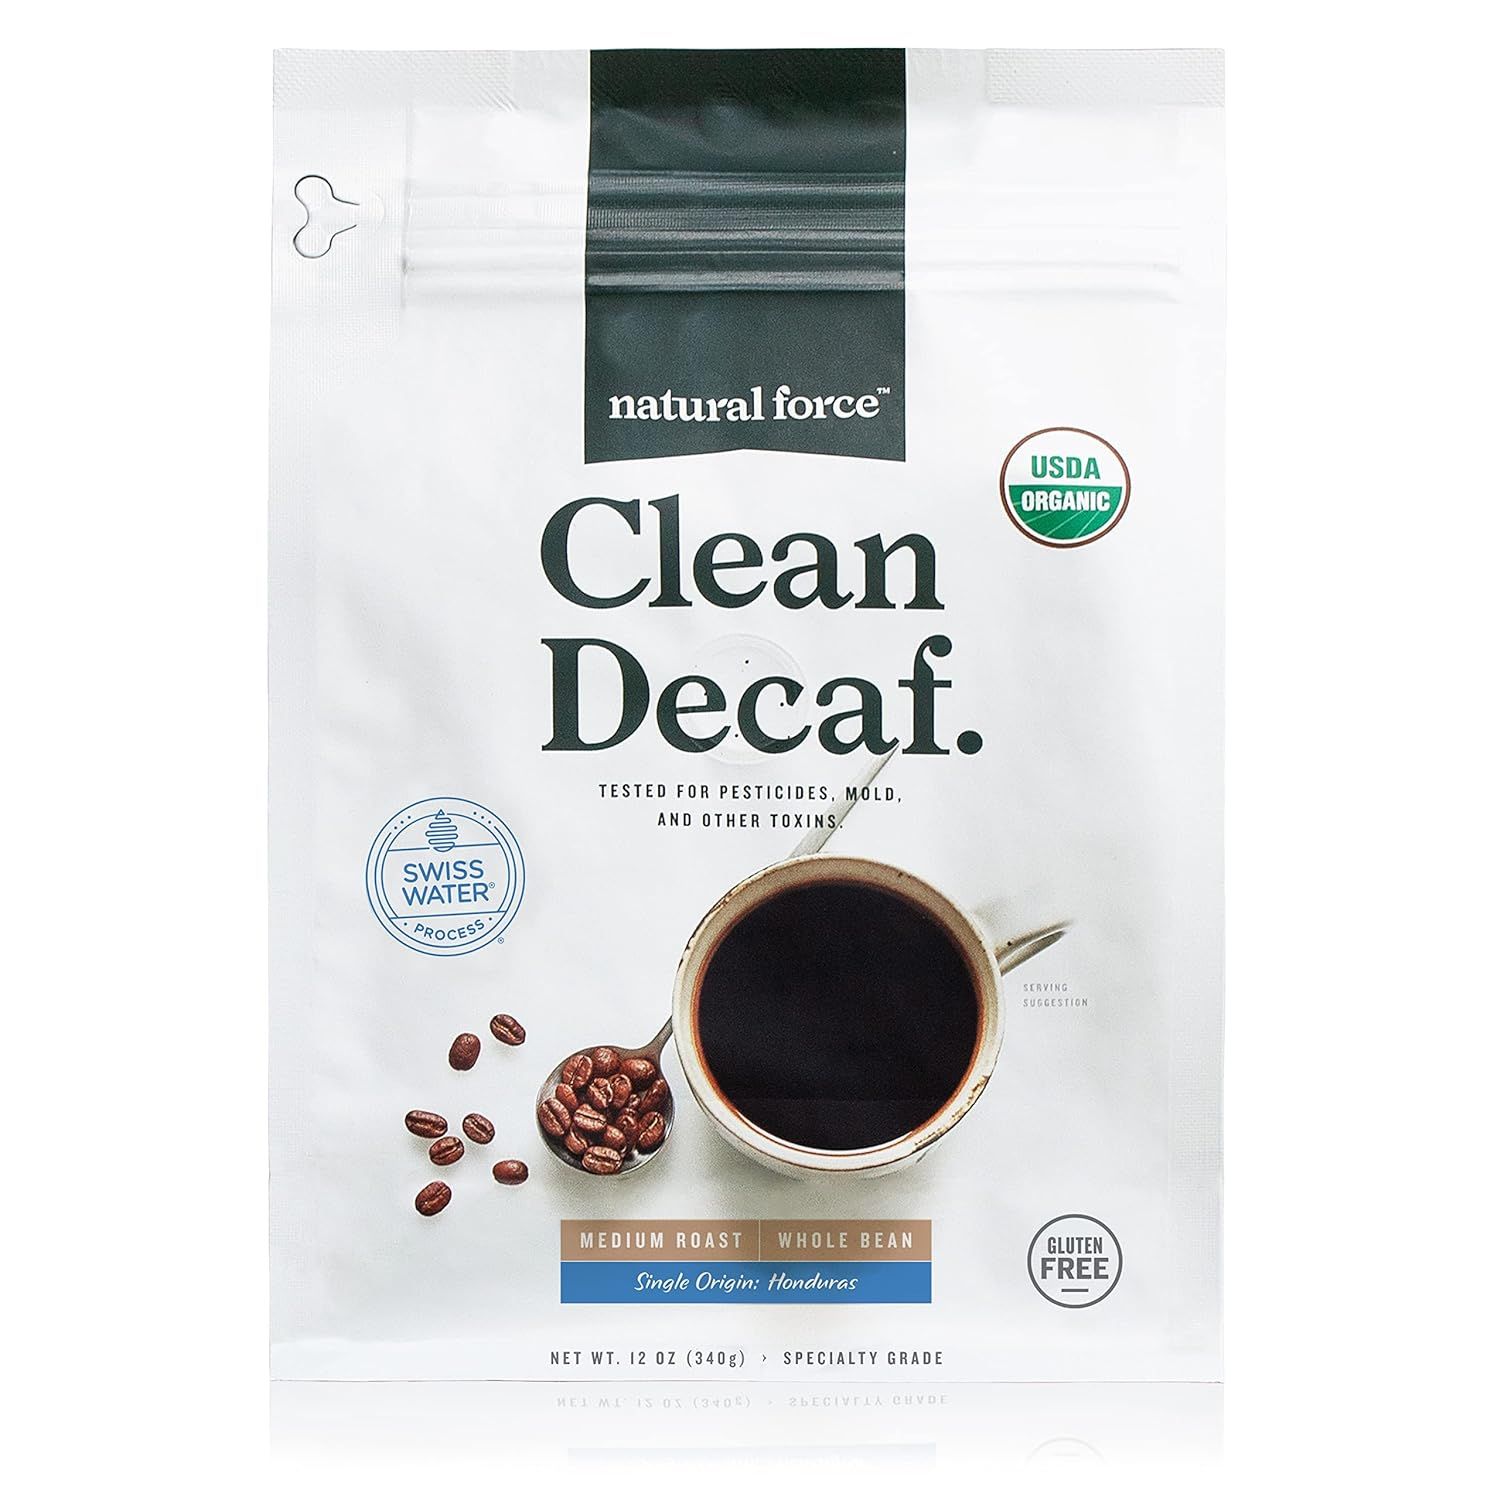 Natural Force - Organic Clean Decaf Coffee, Mold & Mycotoxin Free, Lab Tested for Toxins & Purity... | Amazon (US)